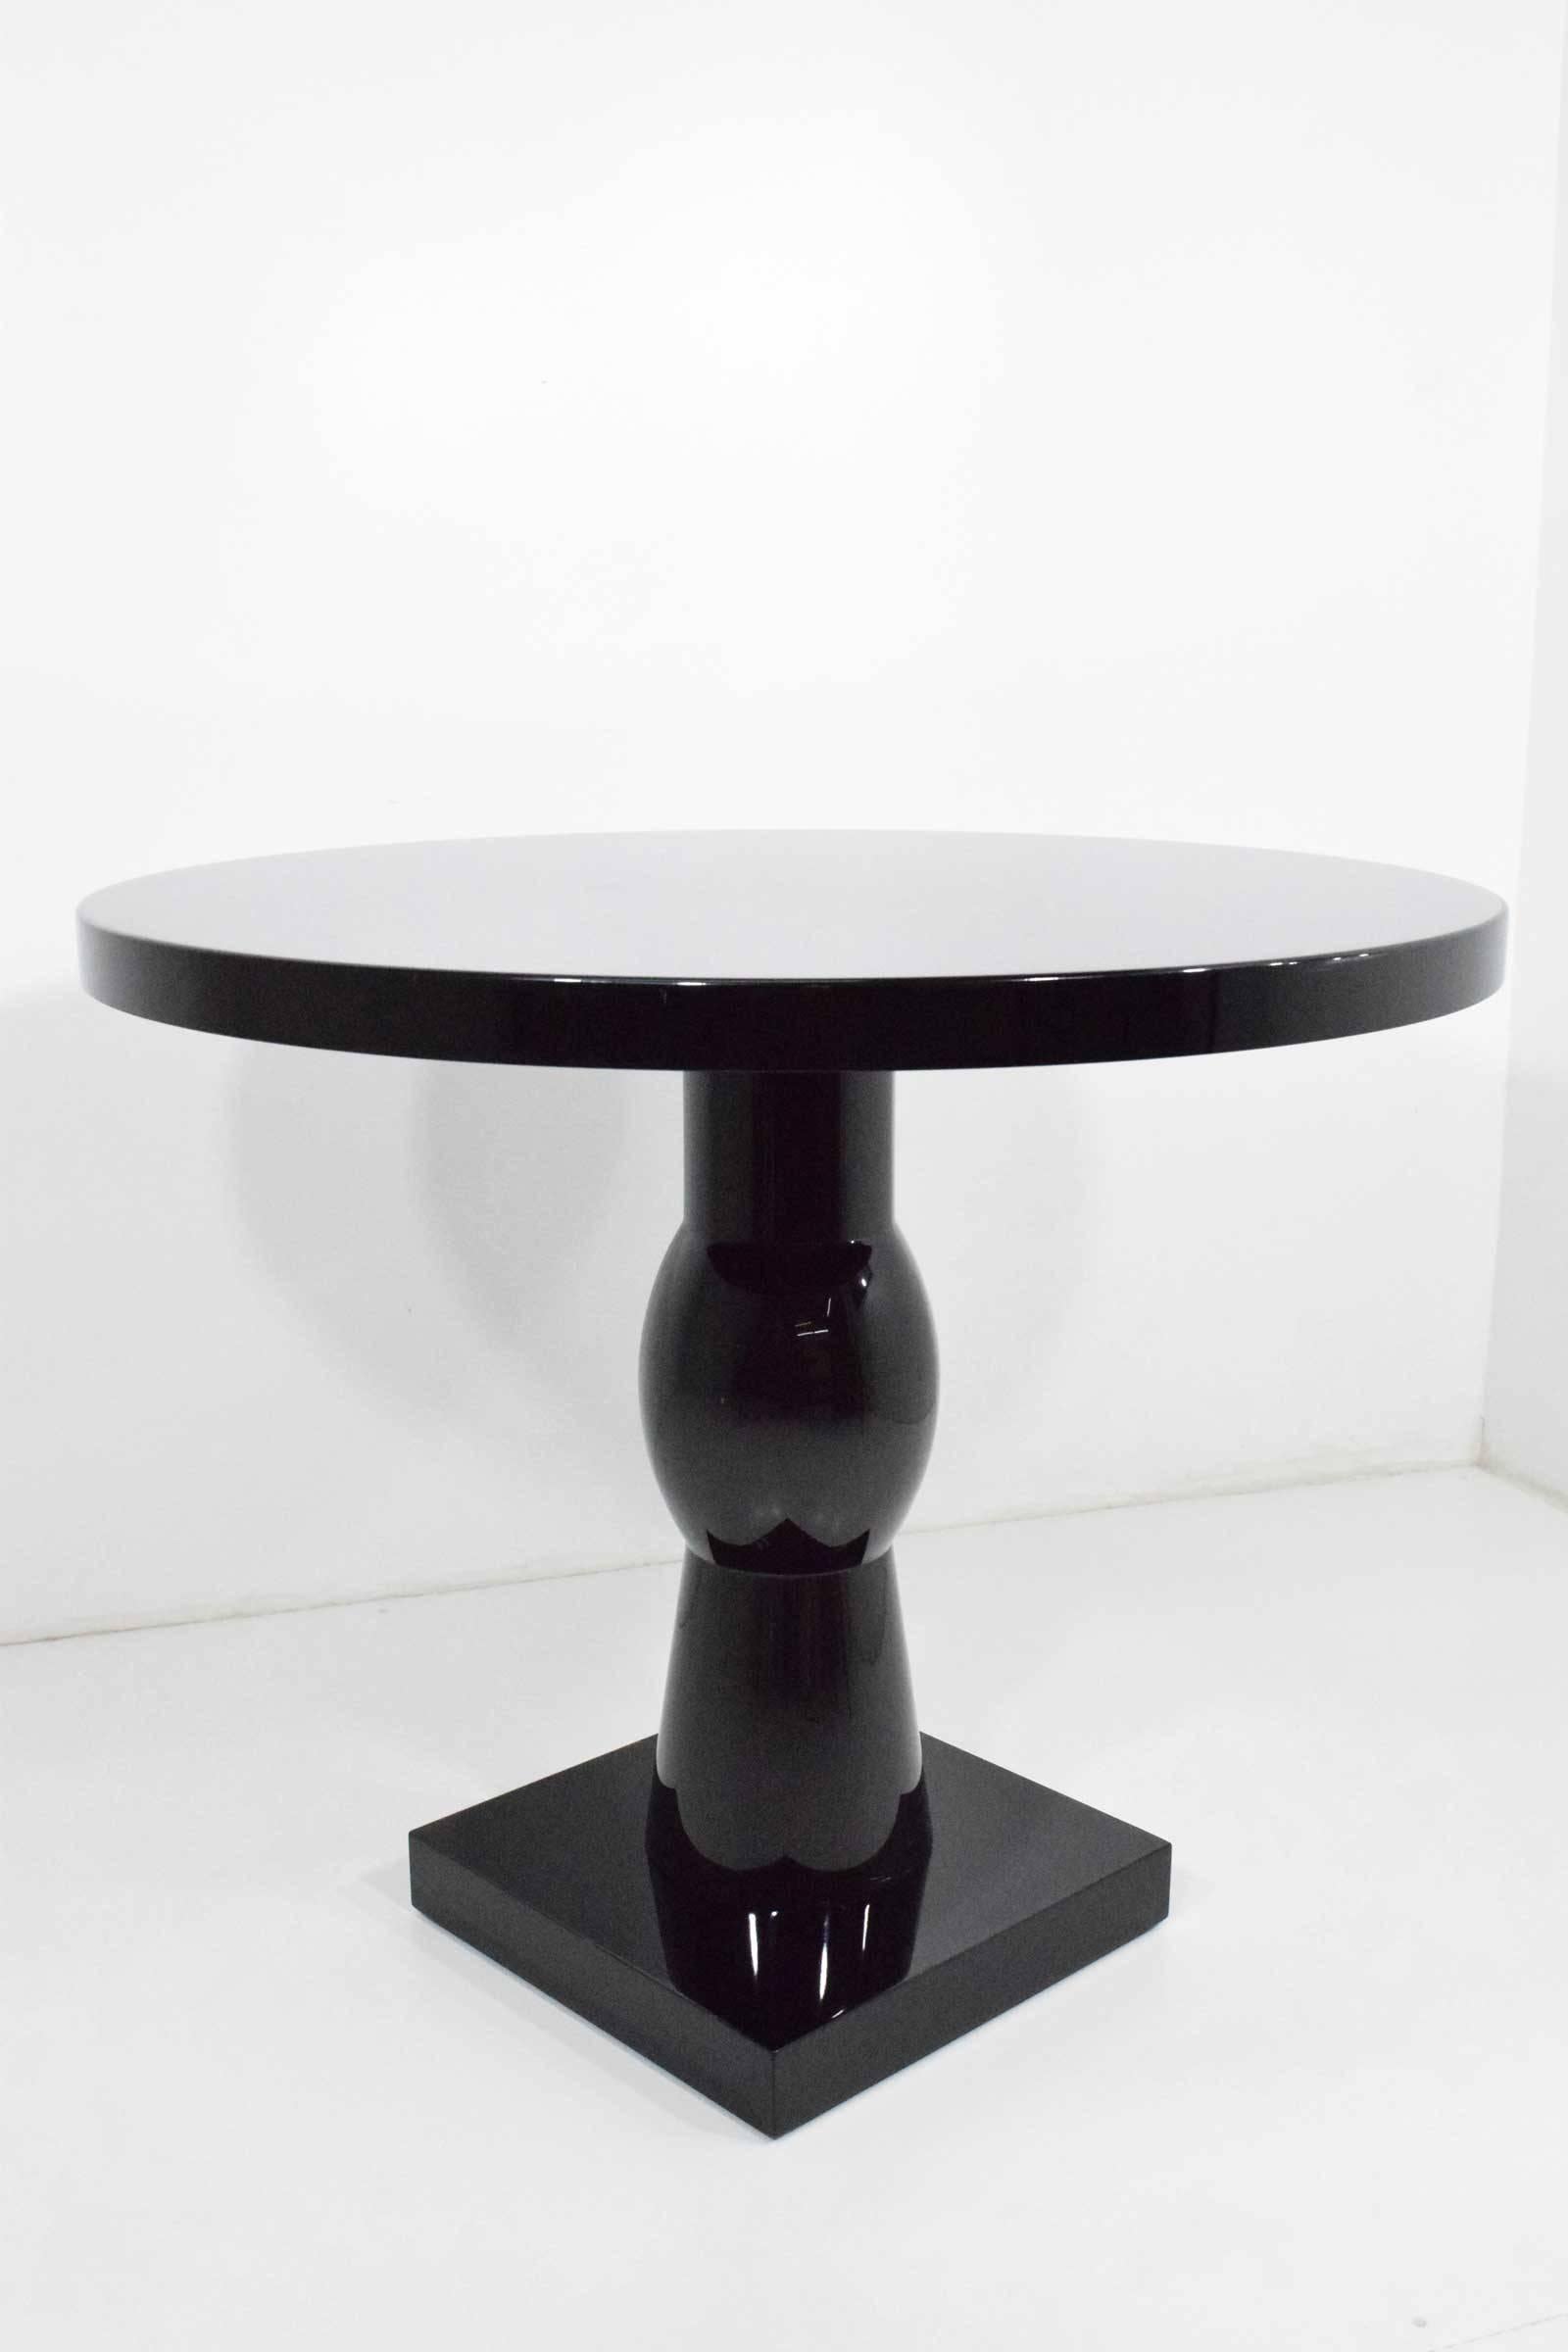 In high-gloss black, the Scarab table by Christian Liaigre.